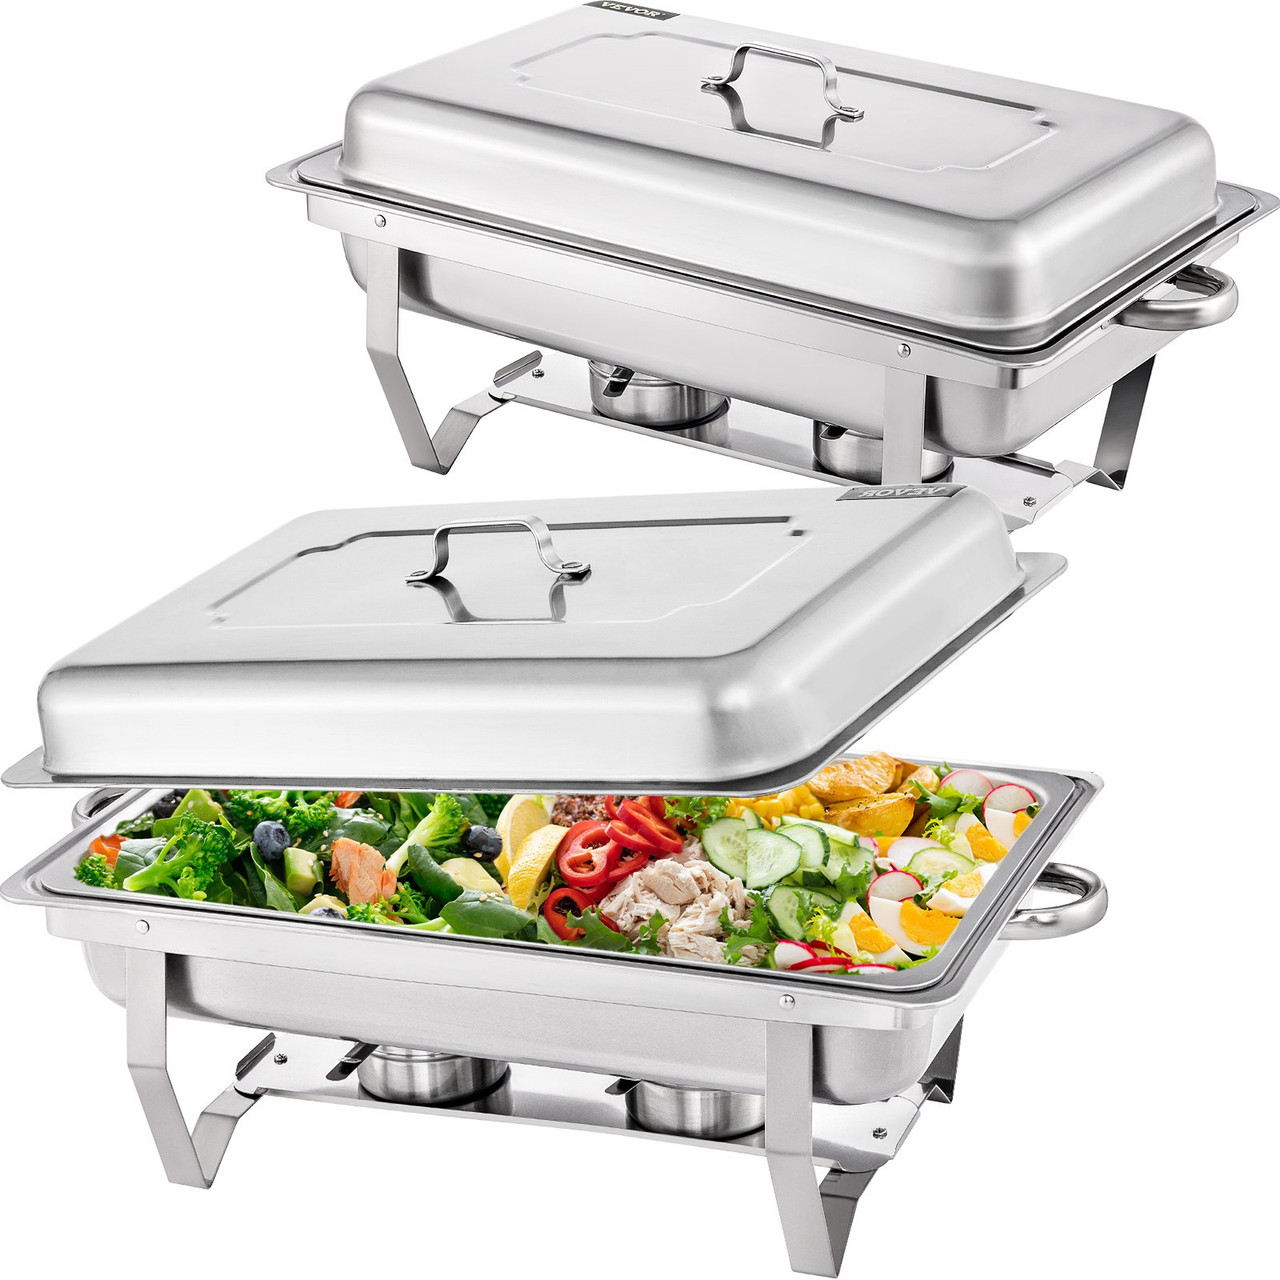 Chafing Dish Set, 2 Pack Chafing Dish Buffet Warmer Set, Stainless